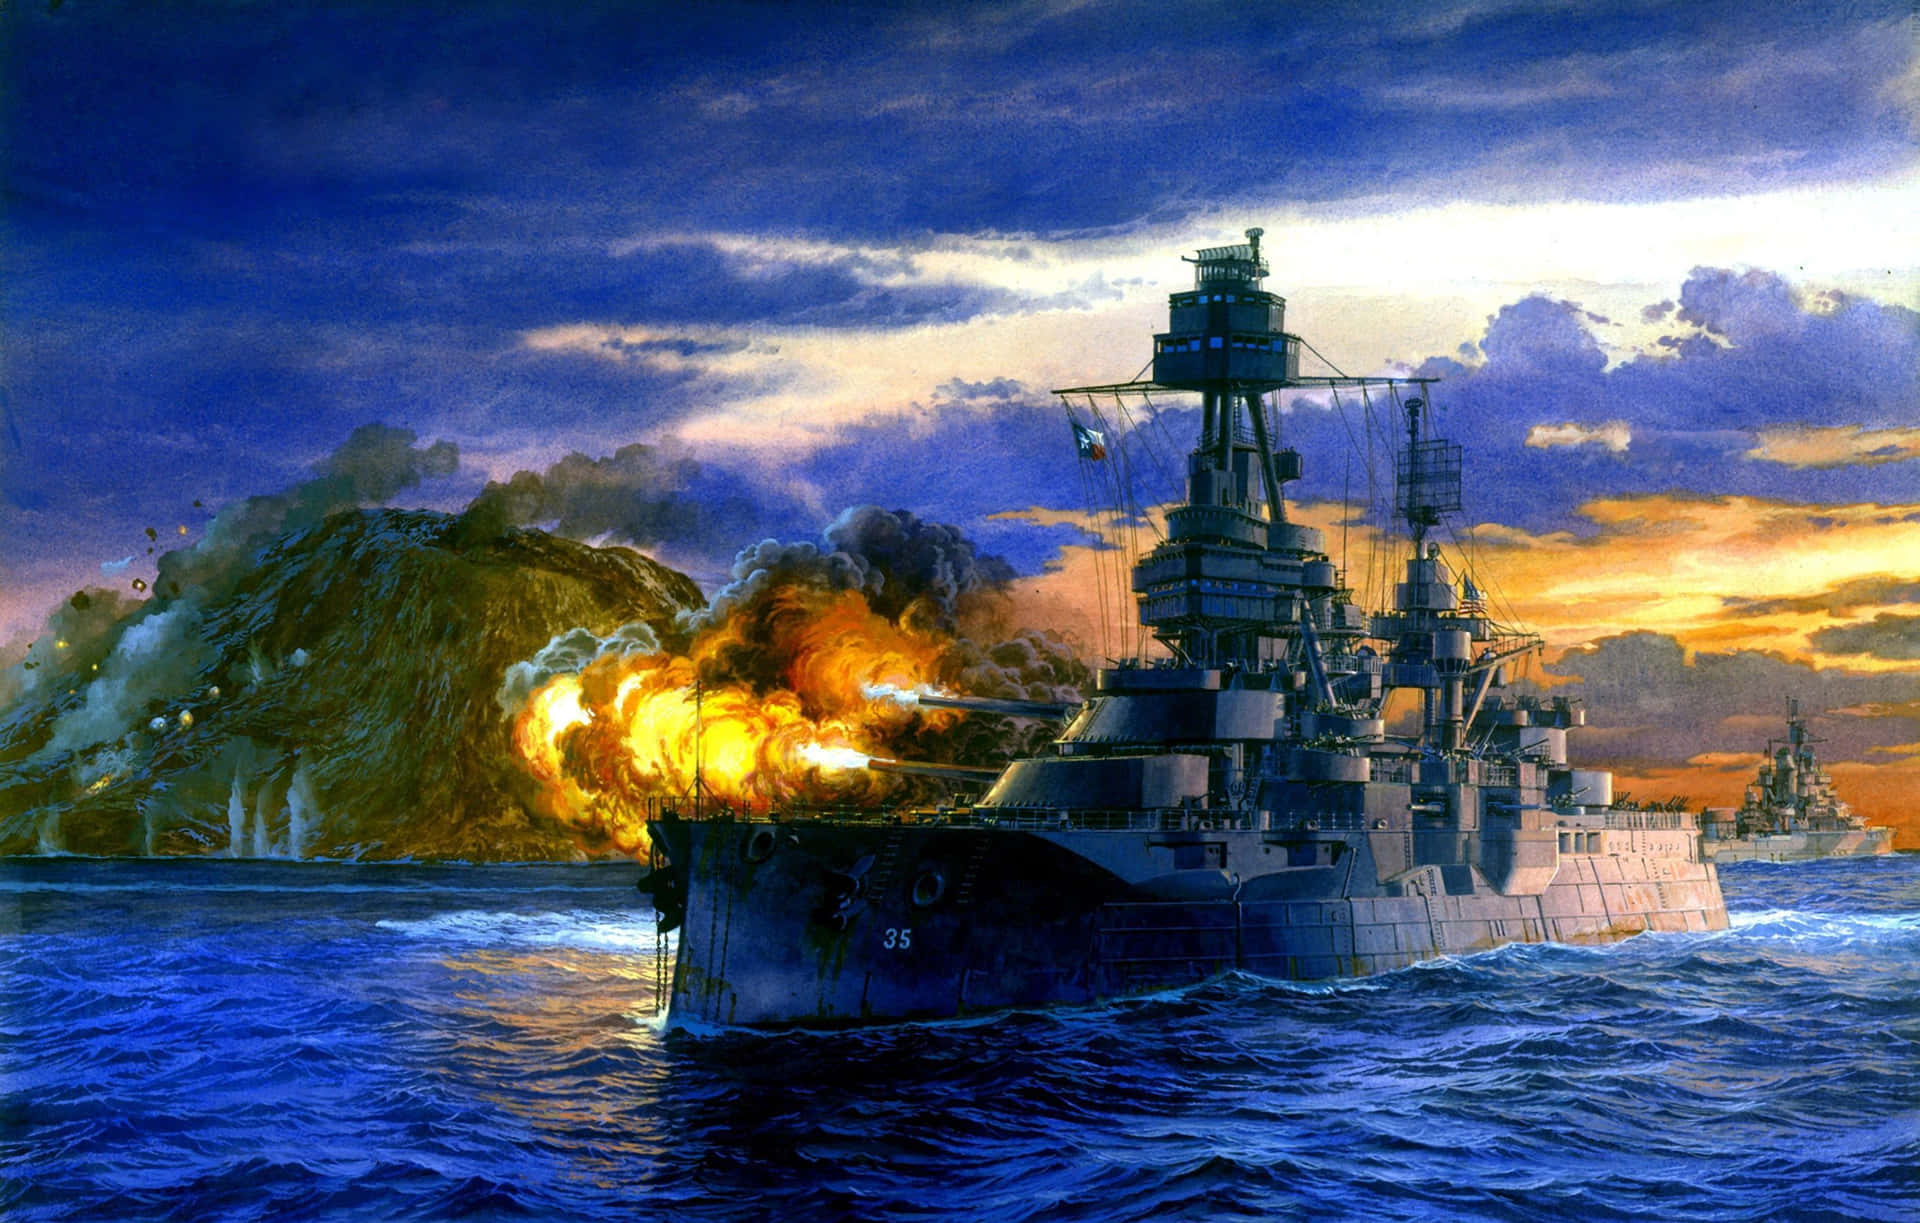 An iconic battleship leading the charge in the ocean